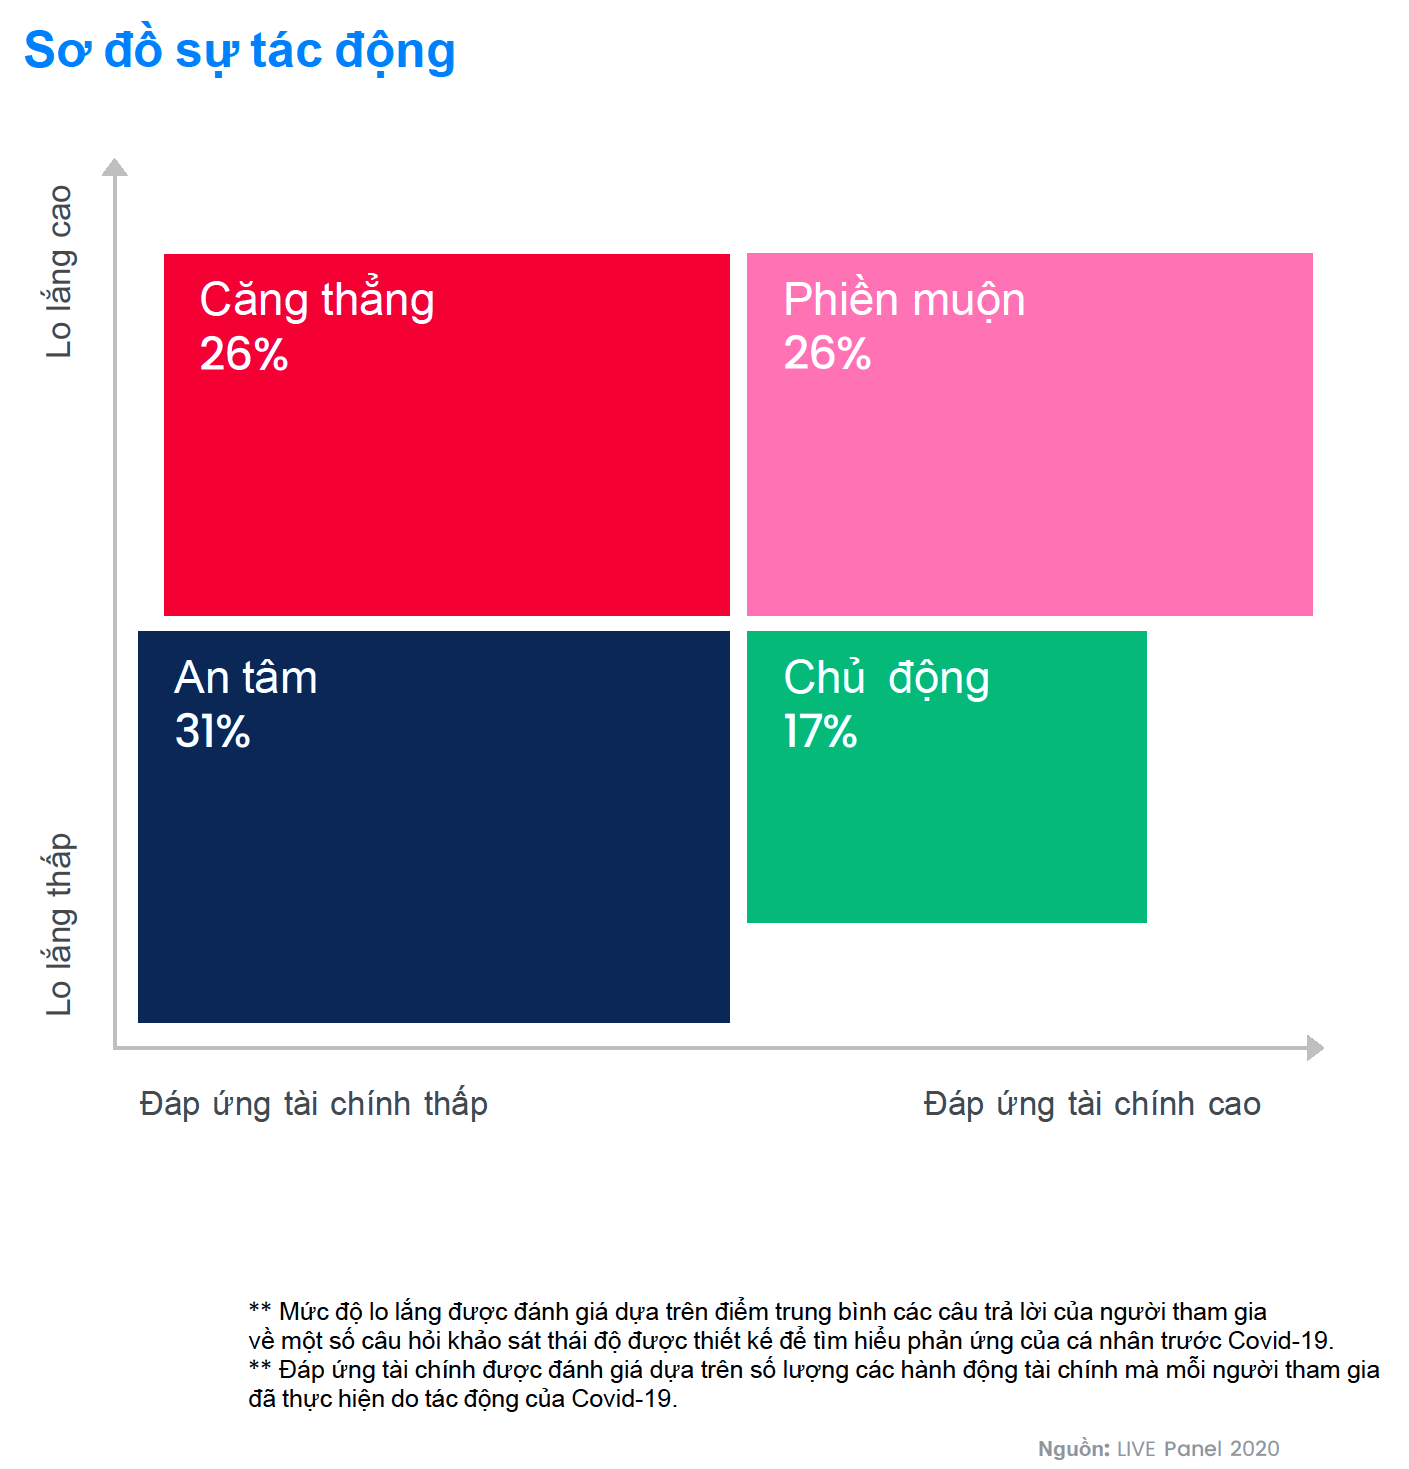 Chart, treemap chart Description automatically generated